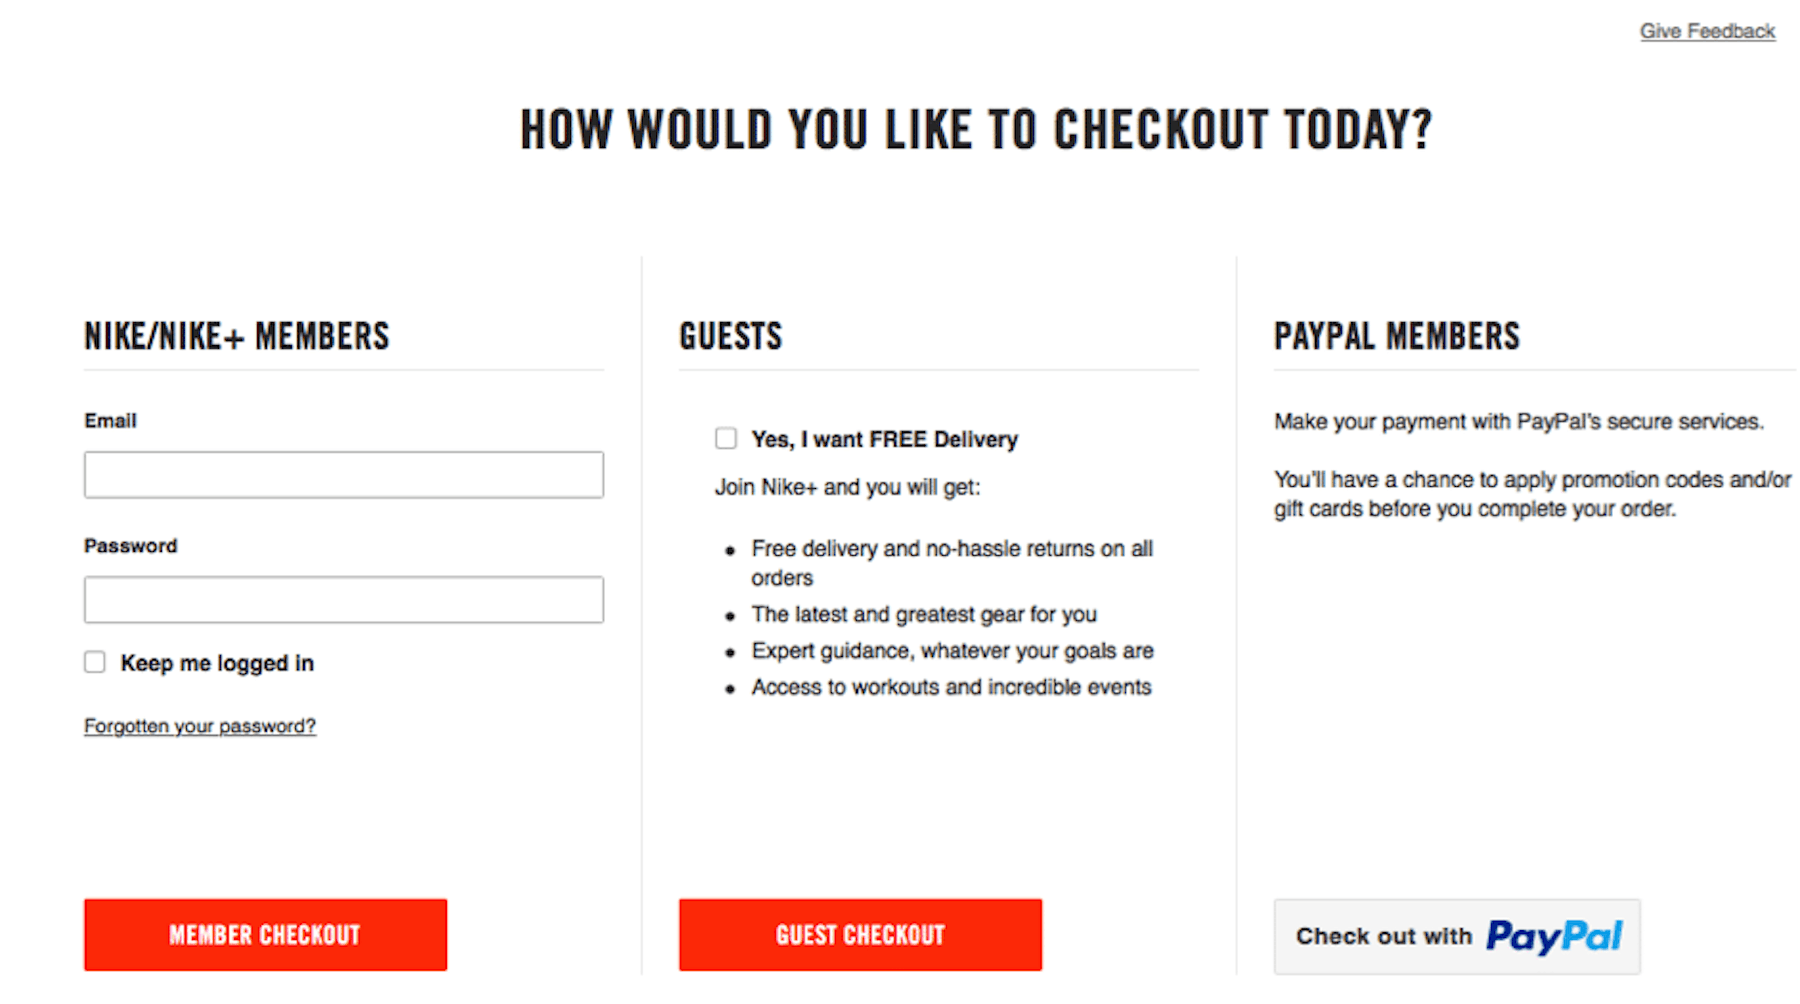 Checkout options - guest, sign in and create account